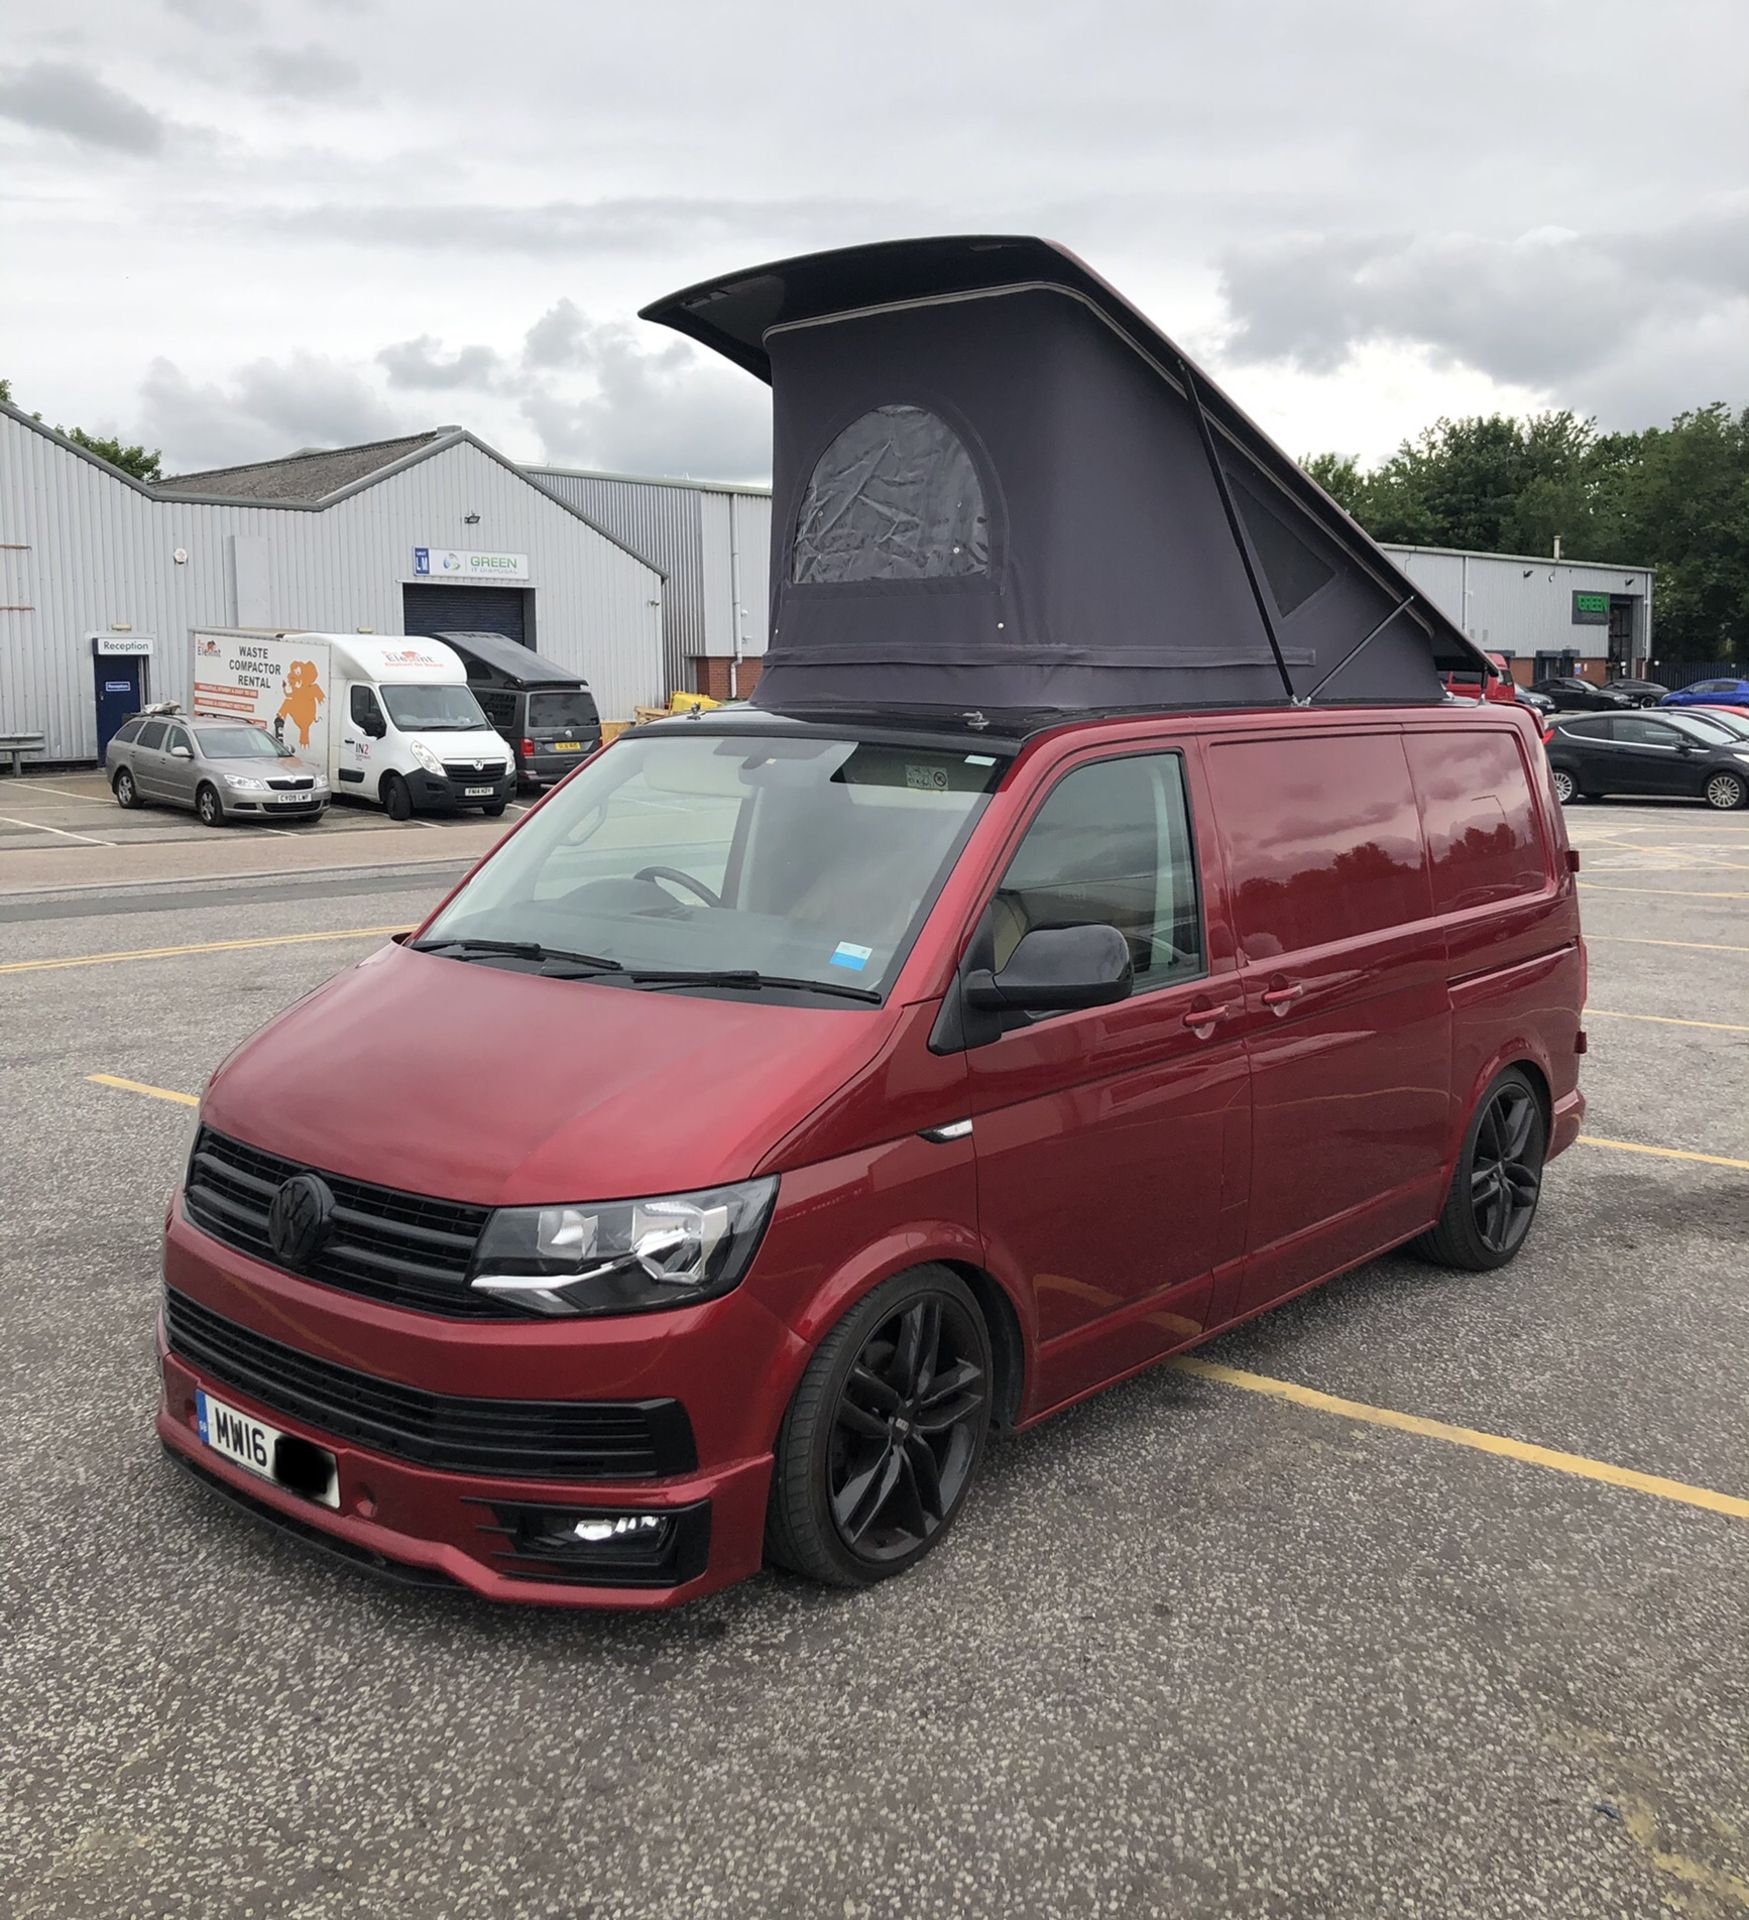 2016 Volkswagen Transporter Camper Part Finished Project - 95%+ of parts required are included - Loc - Image 2 of 23